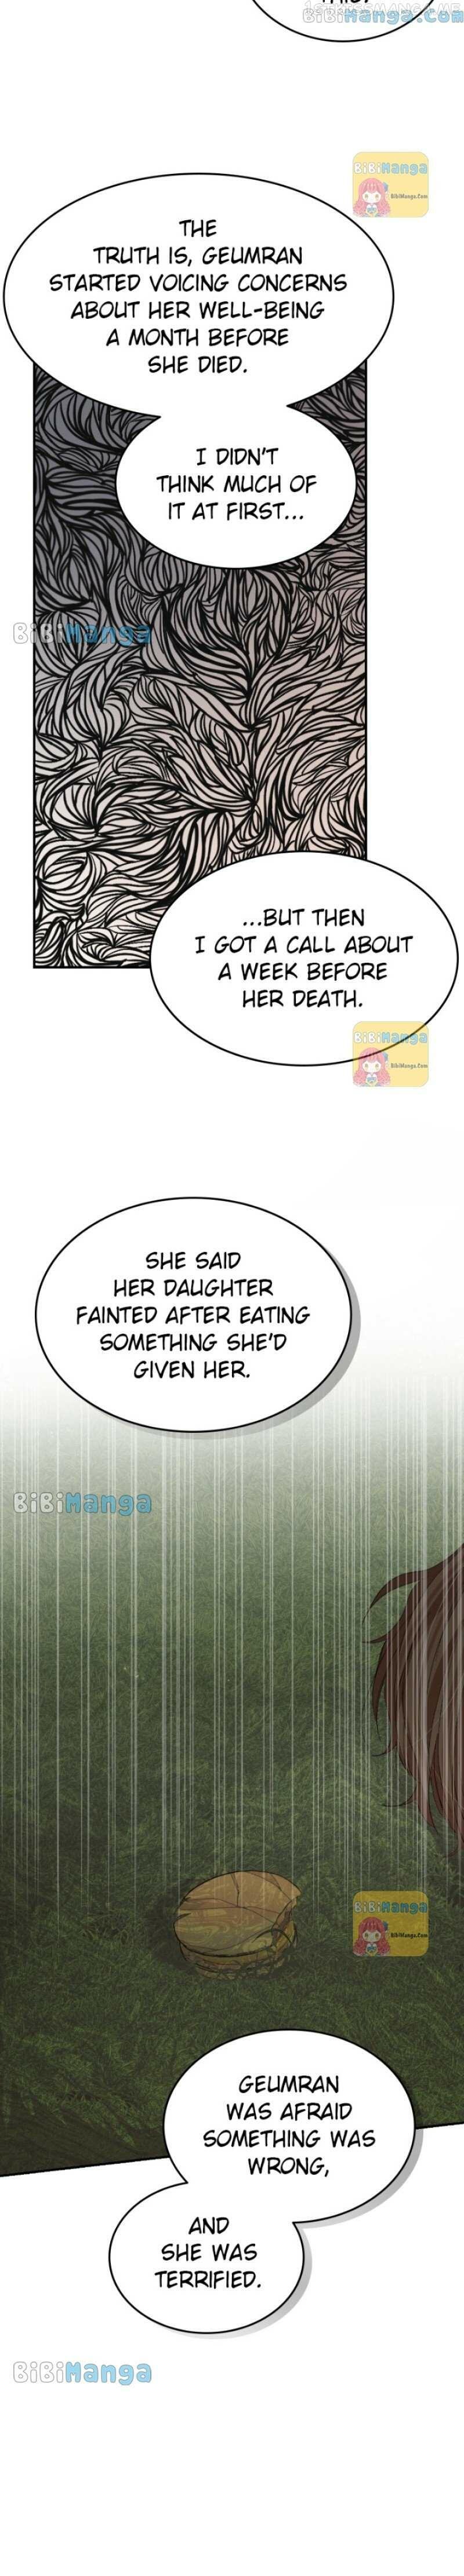 The Essence Of A Perfect Marriage Chapter 83 page 7 - Mangakakalot